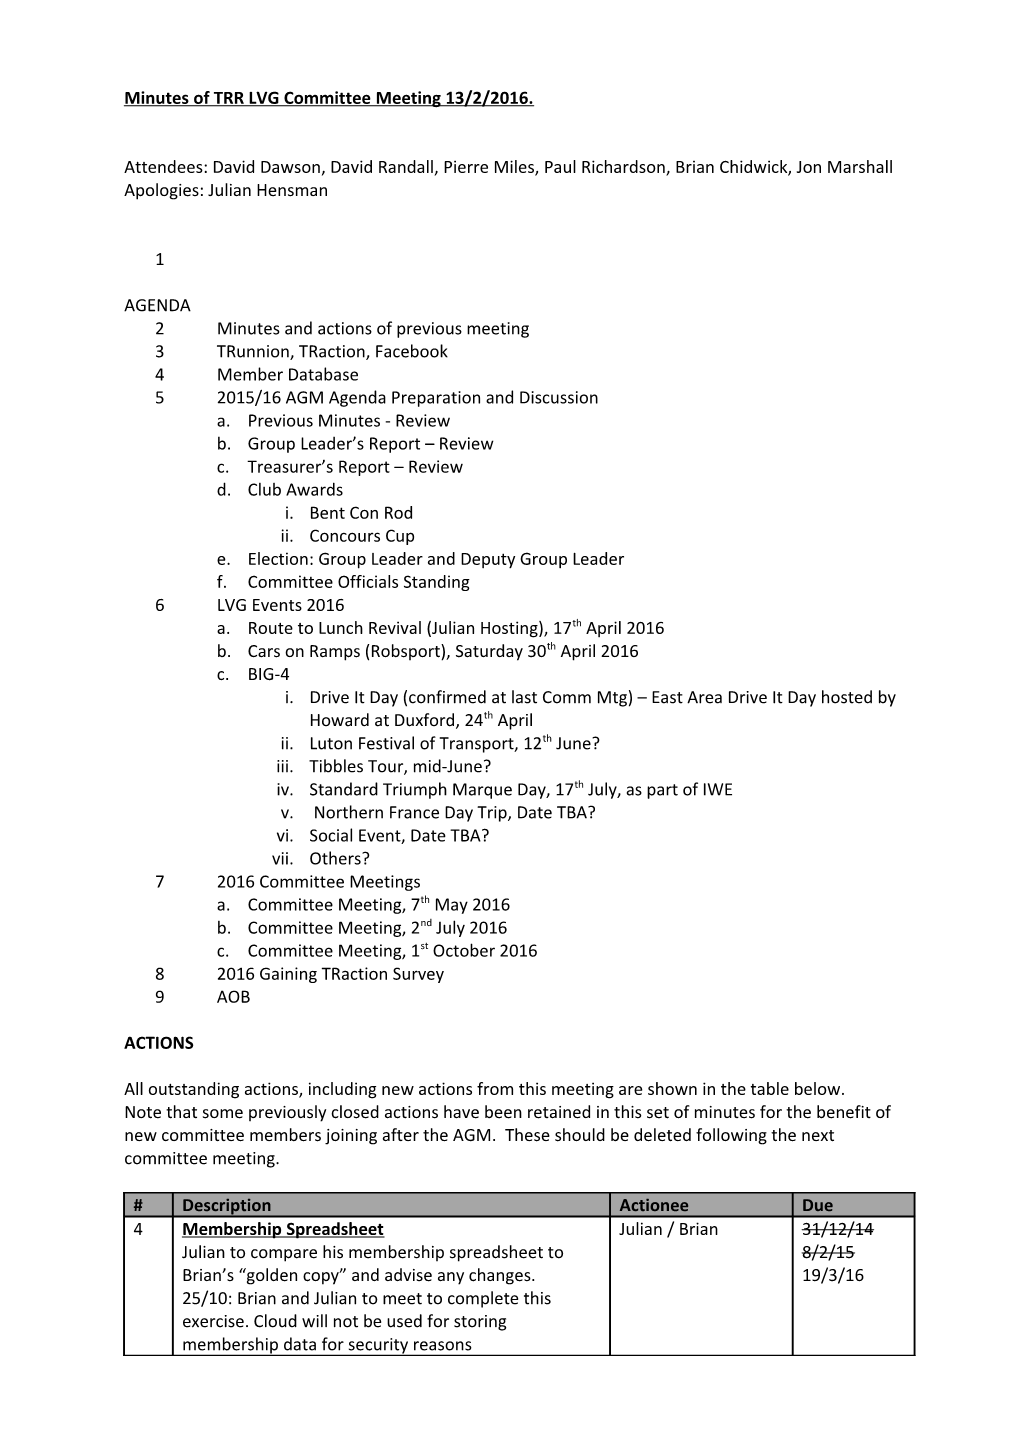 Minutes of TRR LVG Committee Meeting 3/10/2015